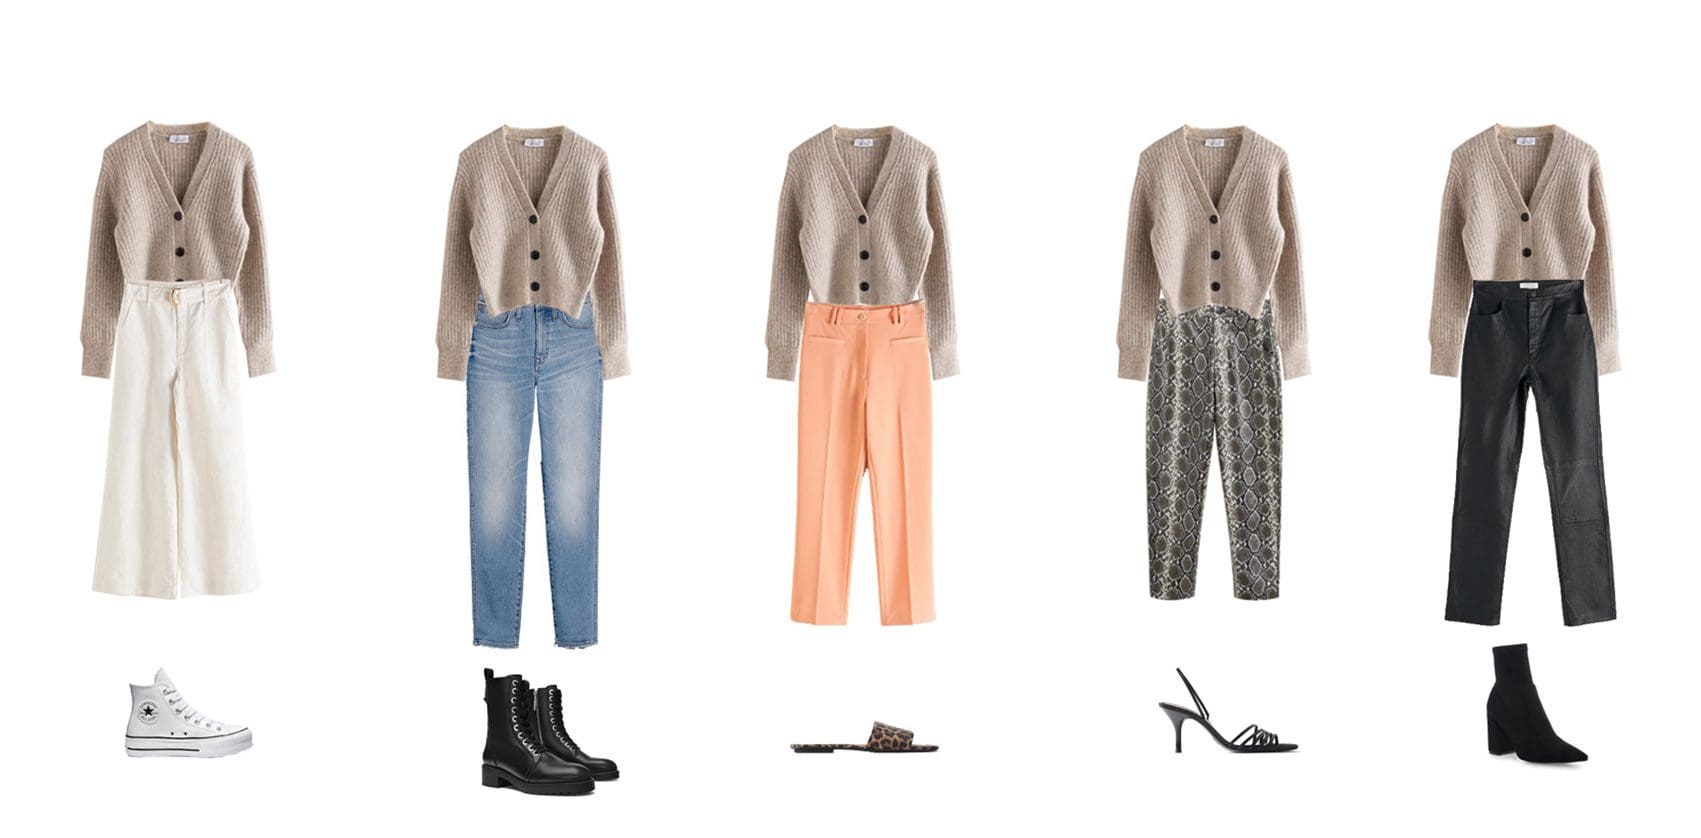 5 ways to put an outfit together using a neutral color